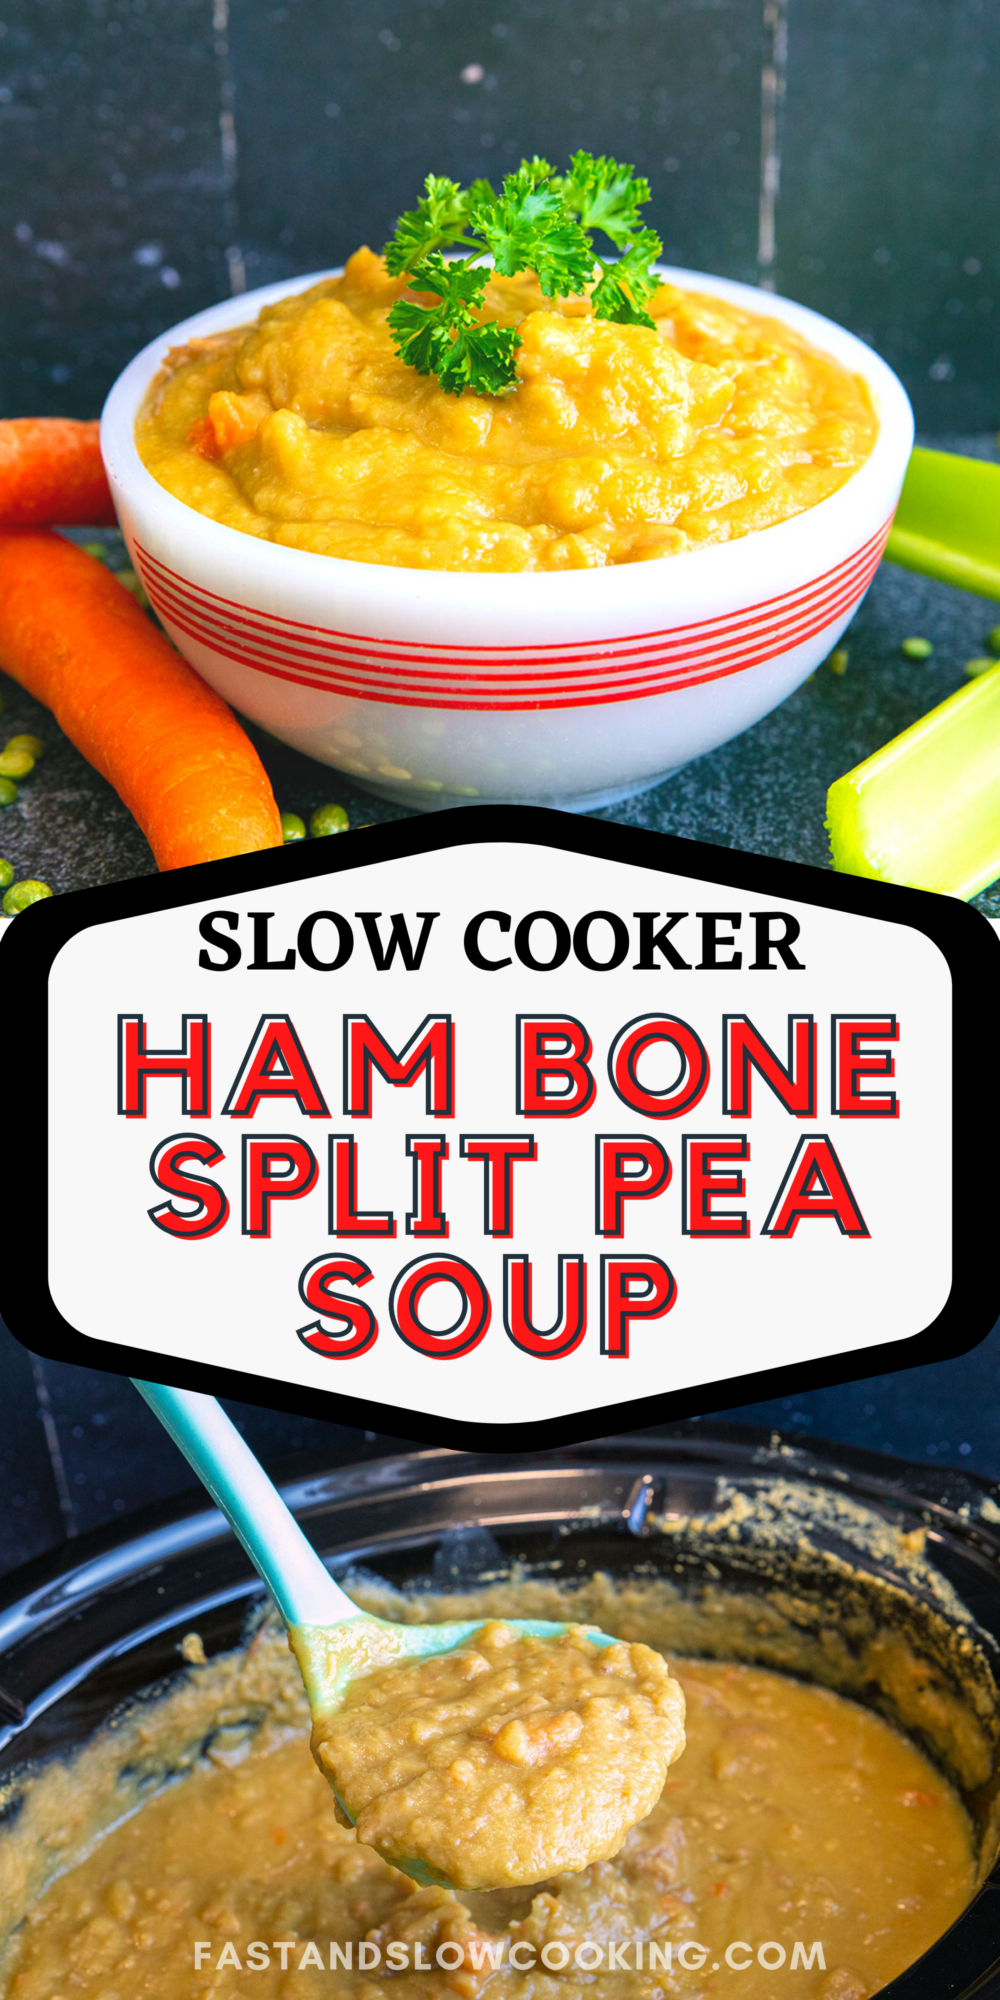 How to use your leftover ham bone to make split pea soup in your slow cooker! This is the most delicious way to make it!